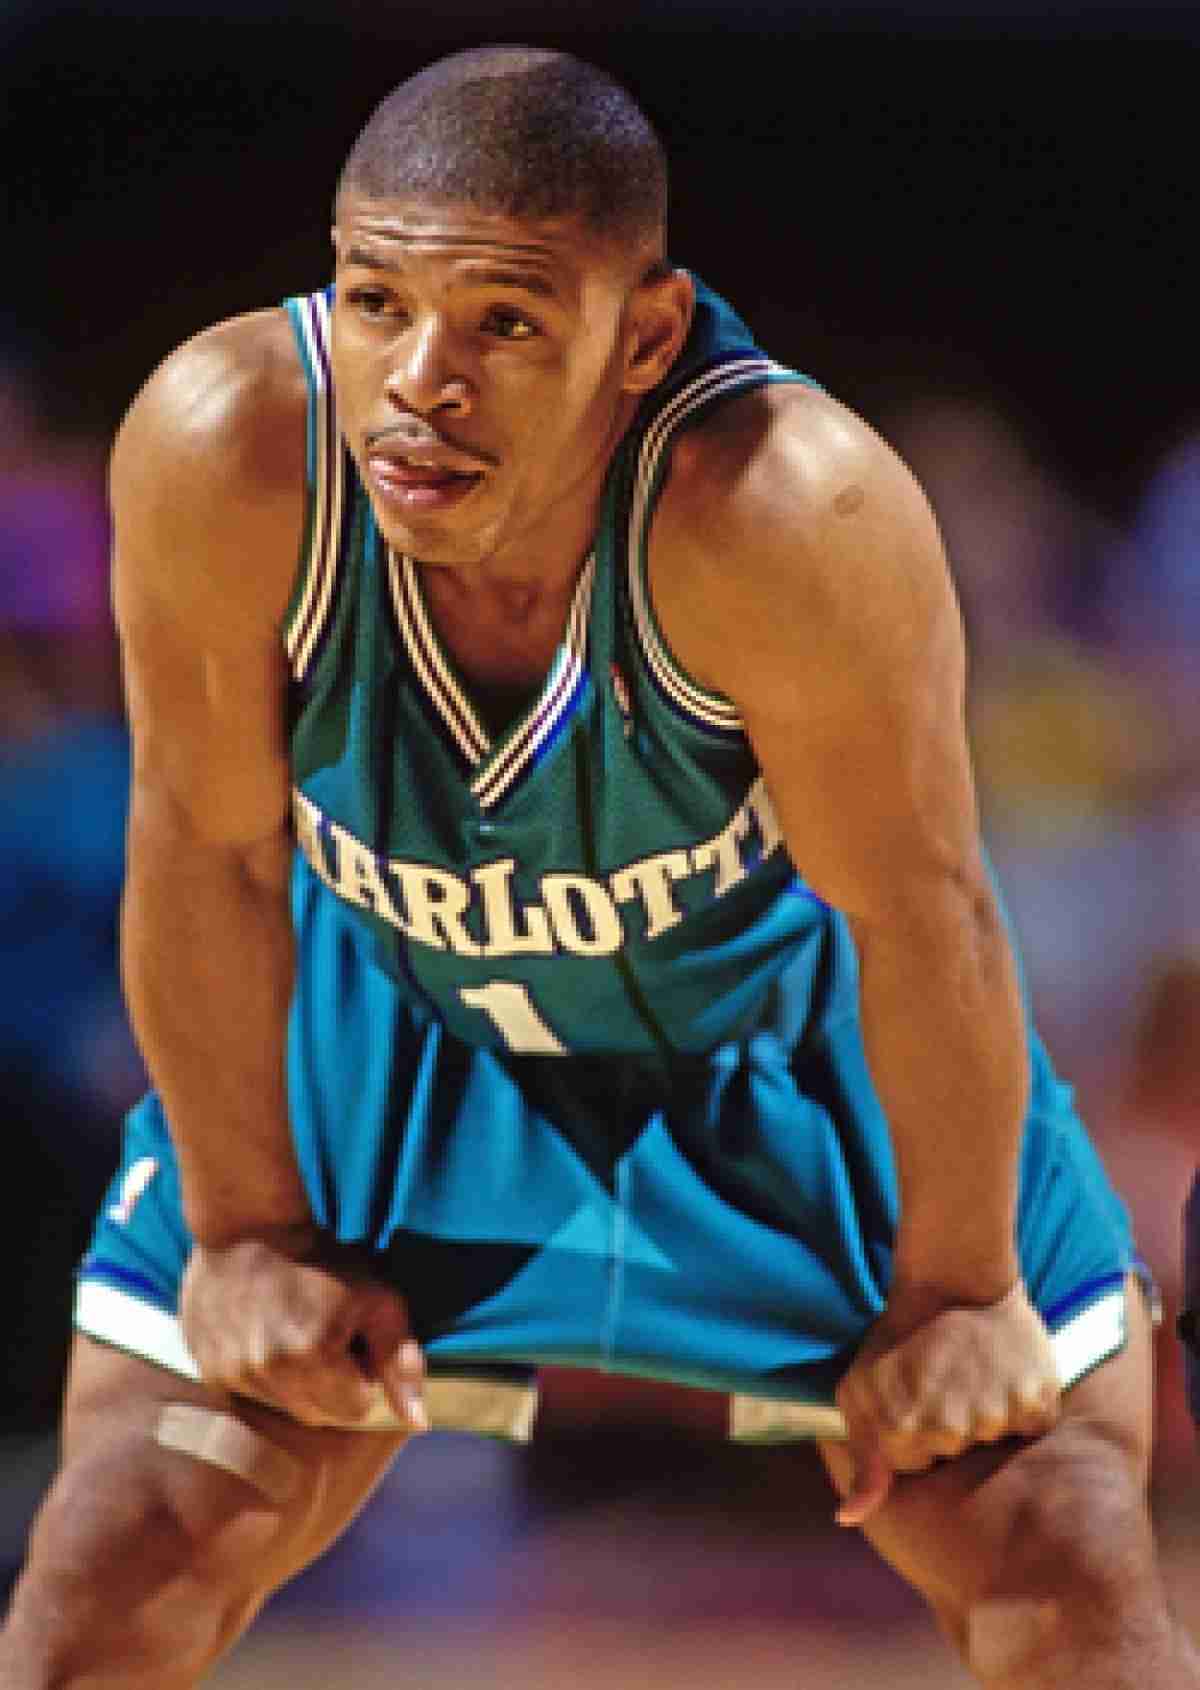 Not in Hall of Fame - Top 50 Charlotte Hornets - 3. Muggsy Bogues